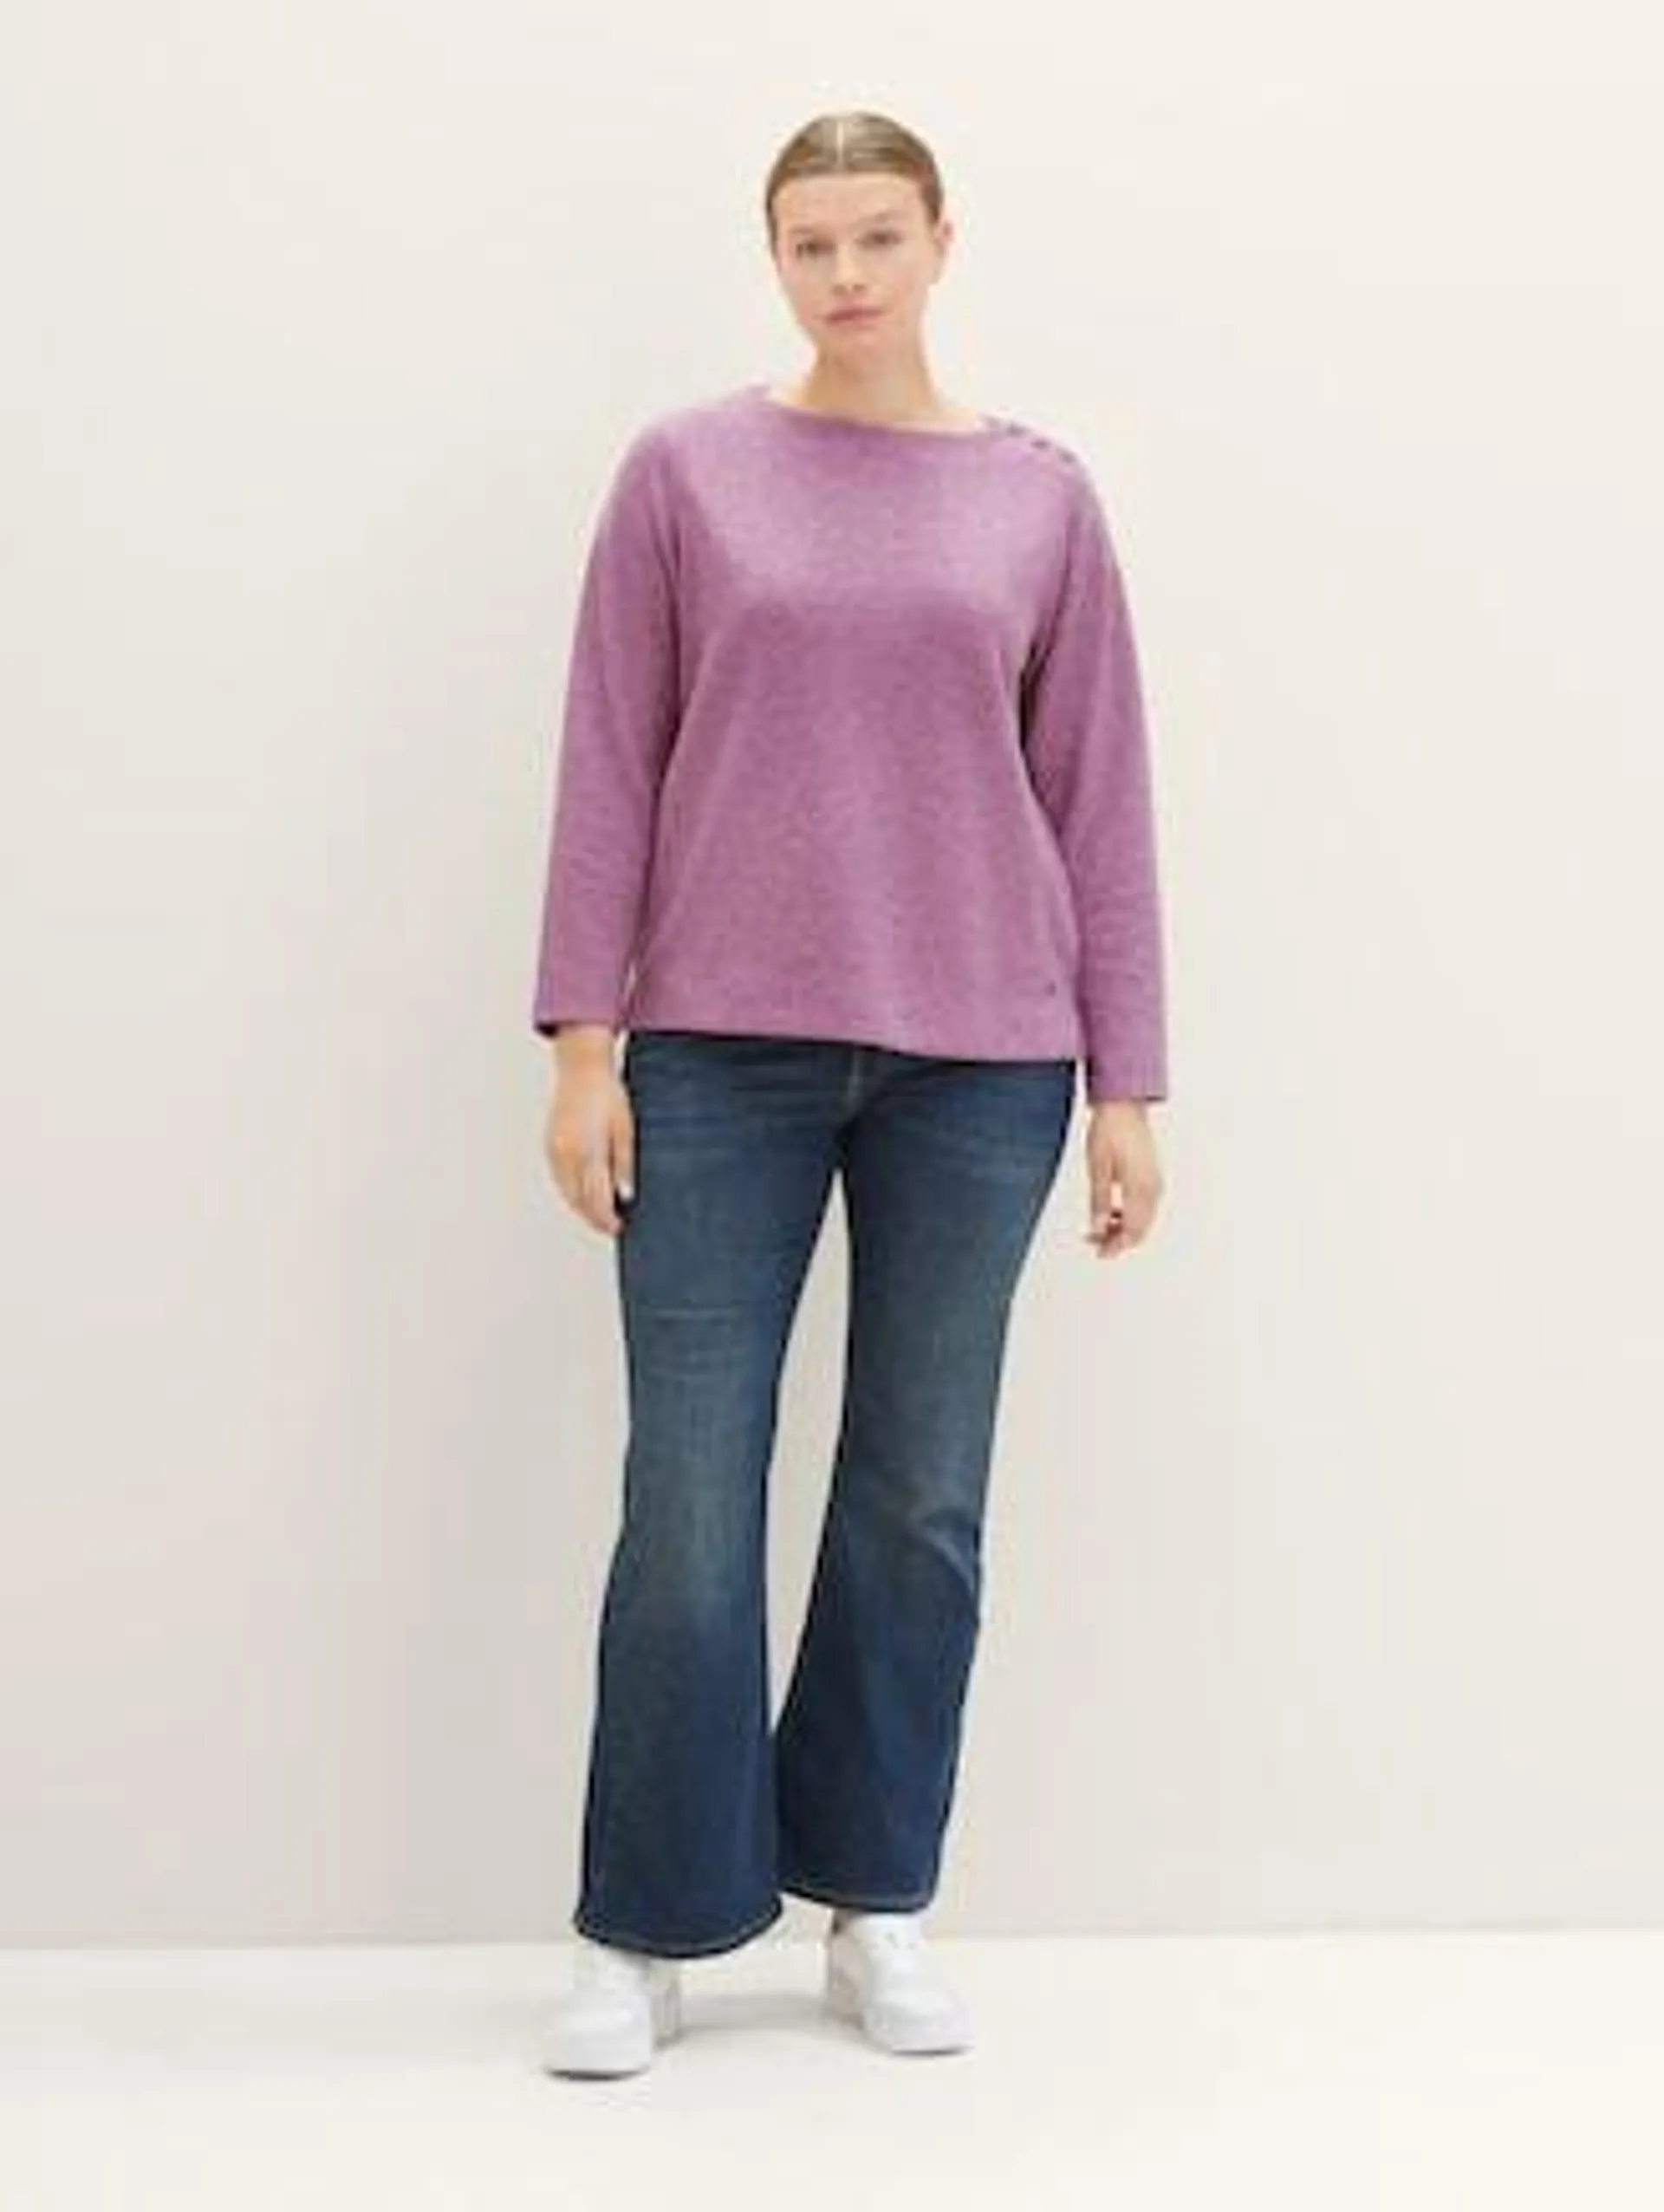 Plus - Sweatshirt with a ribbed texture